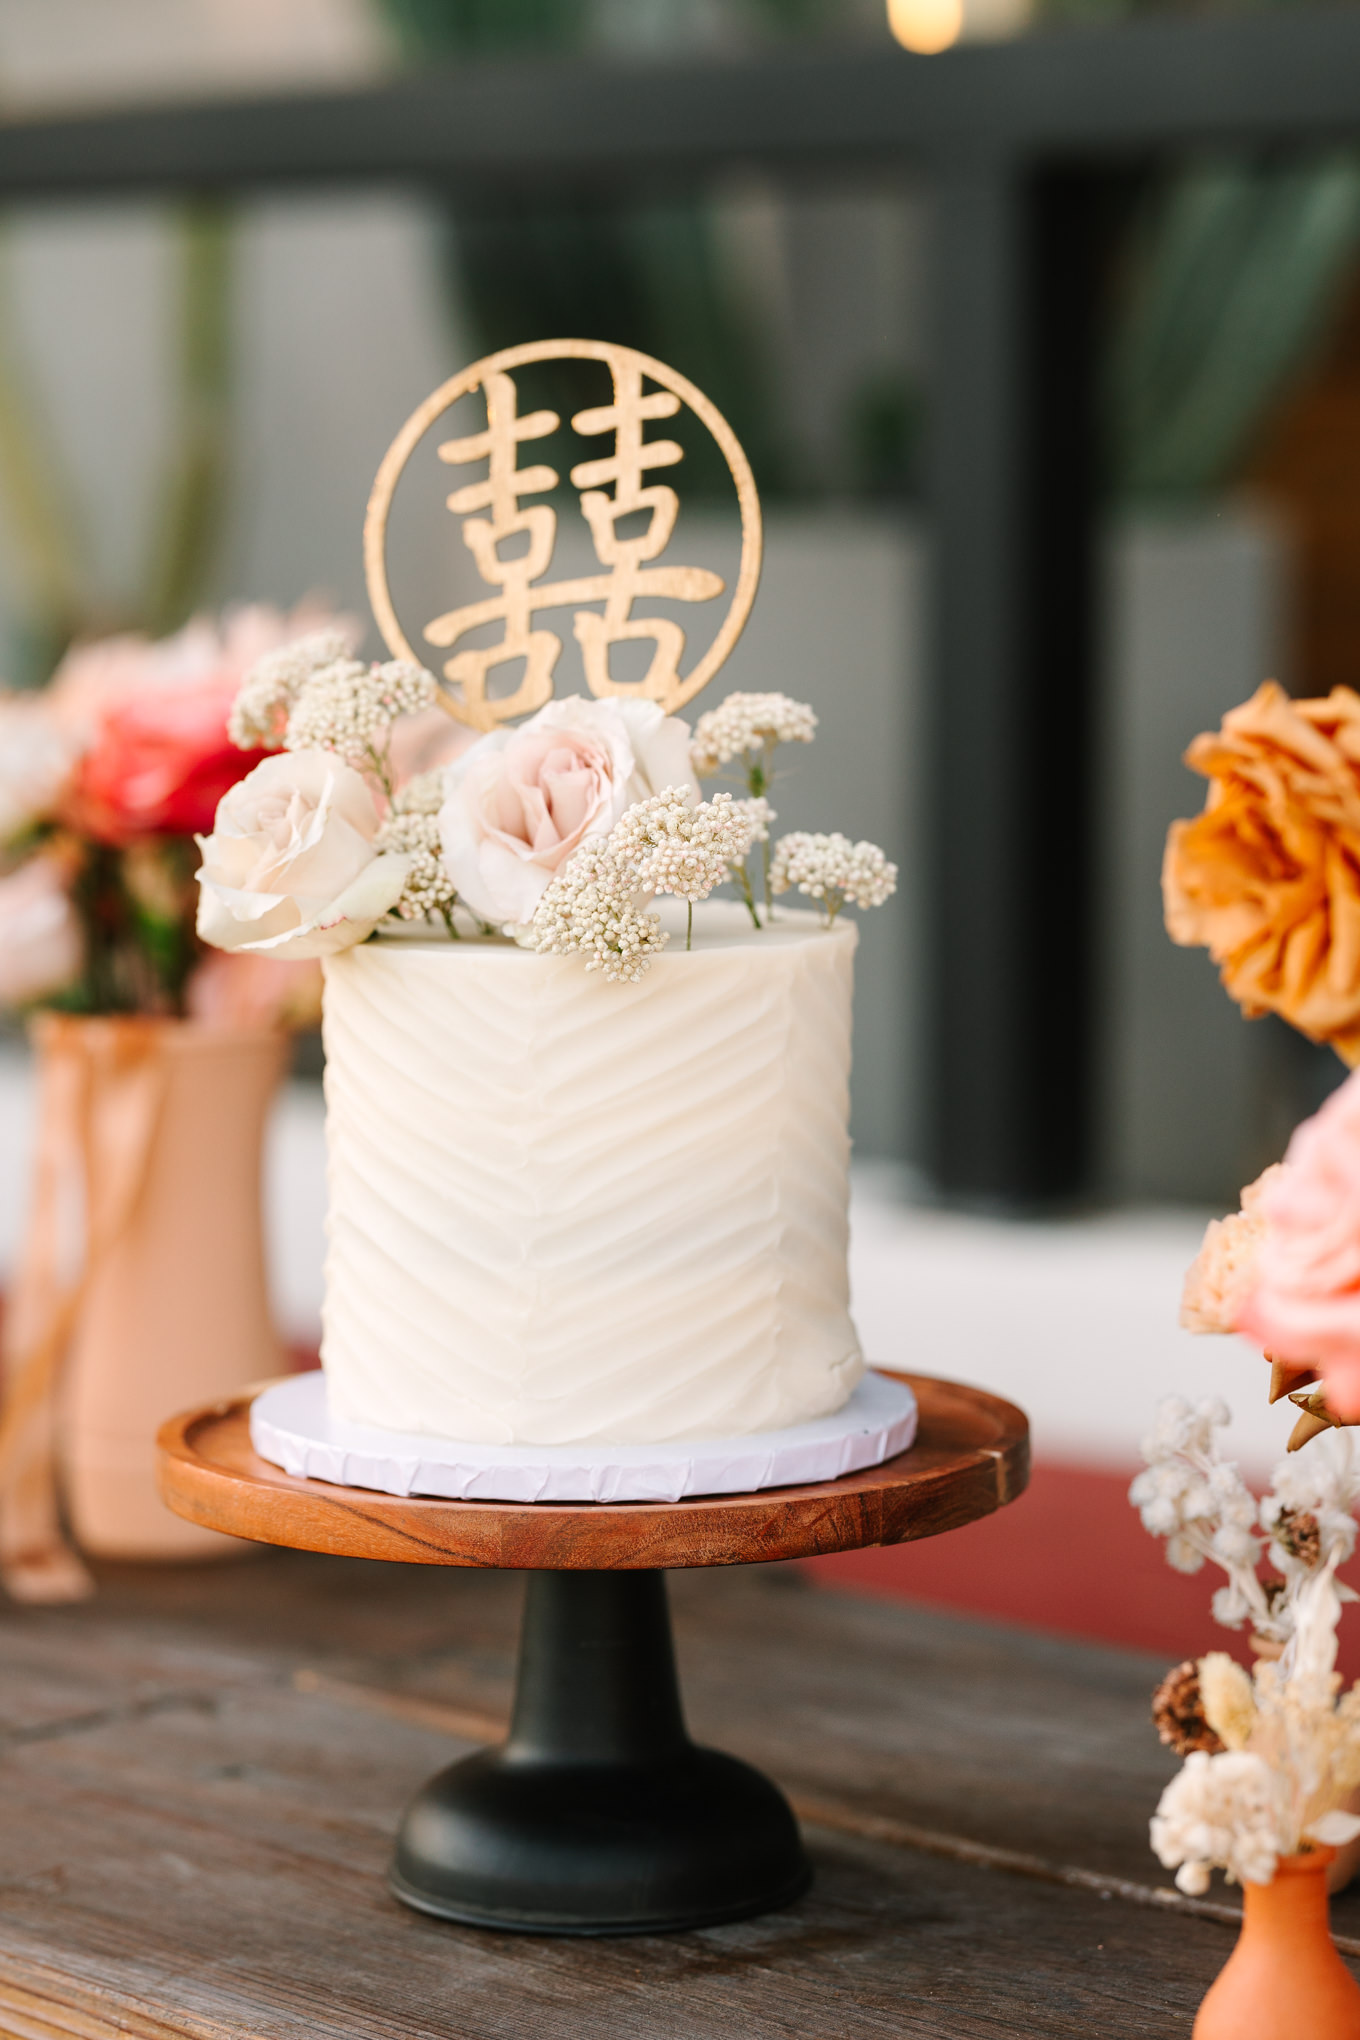 Wedding cake at reception | Pink and orange Lautner Compound wedding | Colorful Palm Springs wedding photography | #palmspringsphotographer #palmspringswedding #lautnercompound #southerncaliforniawedding  Source: Mary Costa Photography | Los Angeles